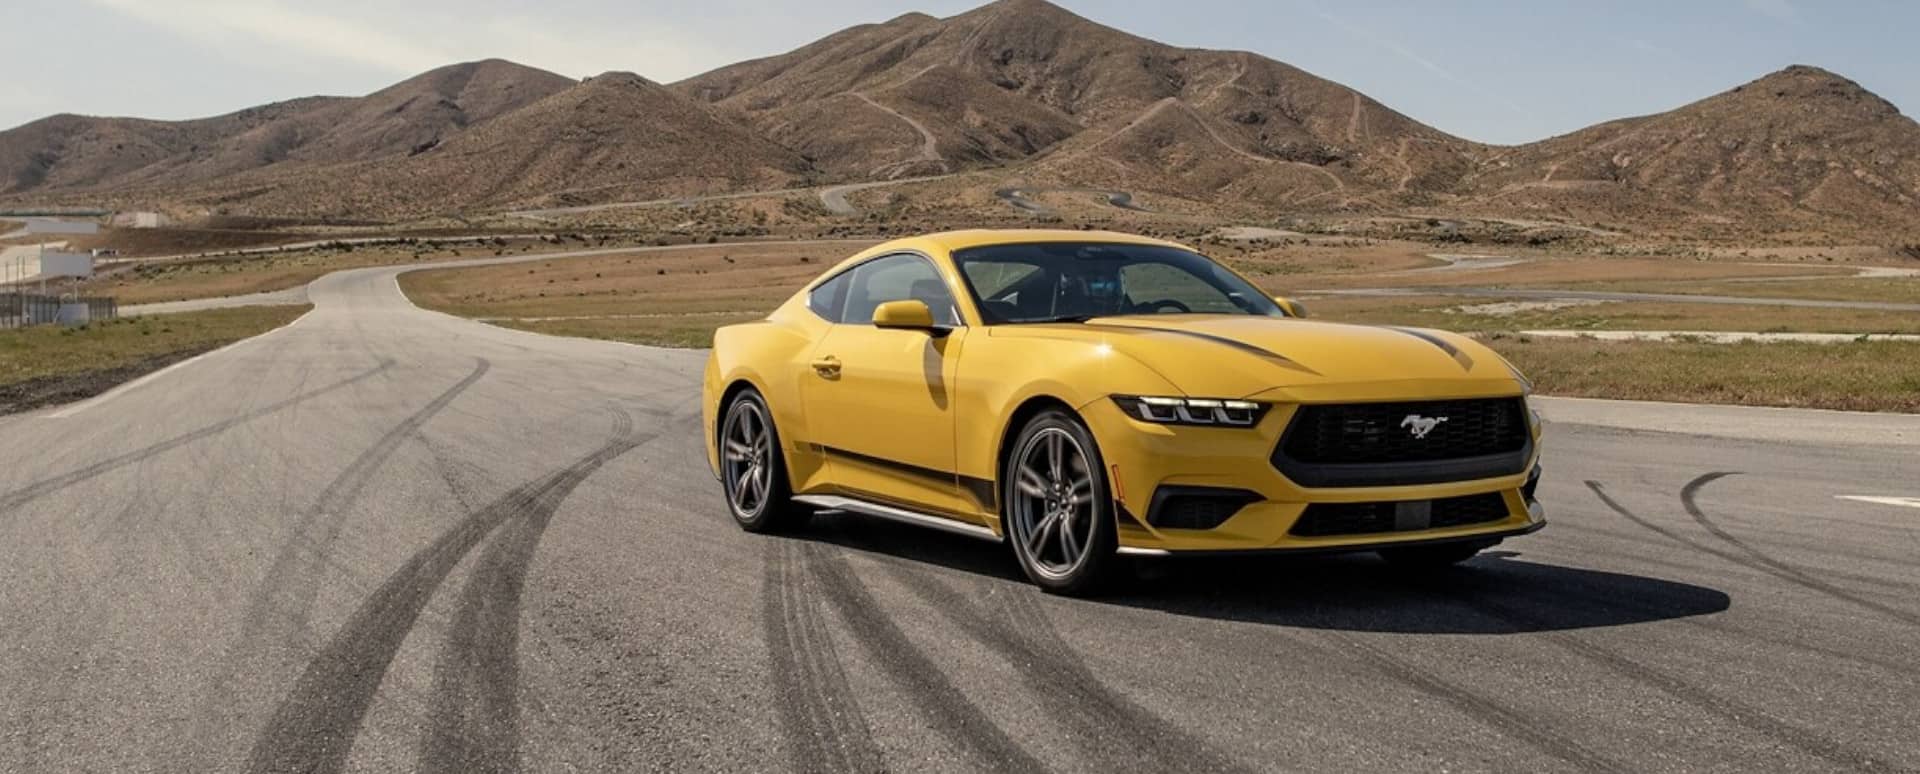 Yellow Ford Mustang Exterior Front Driving